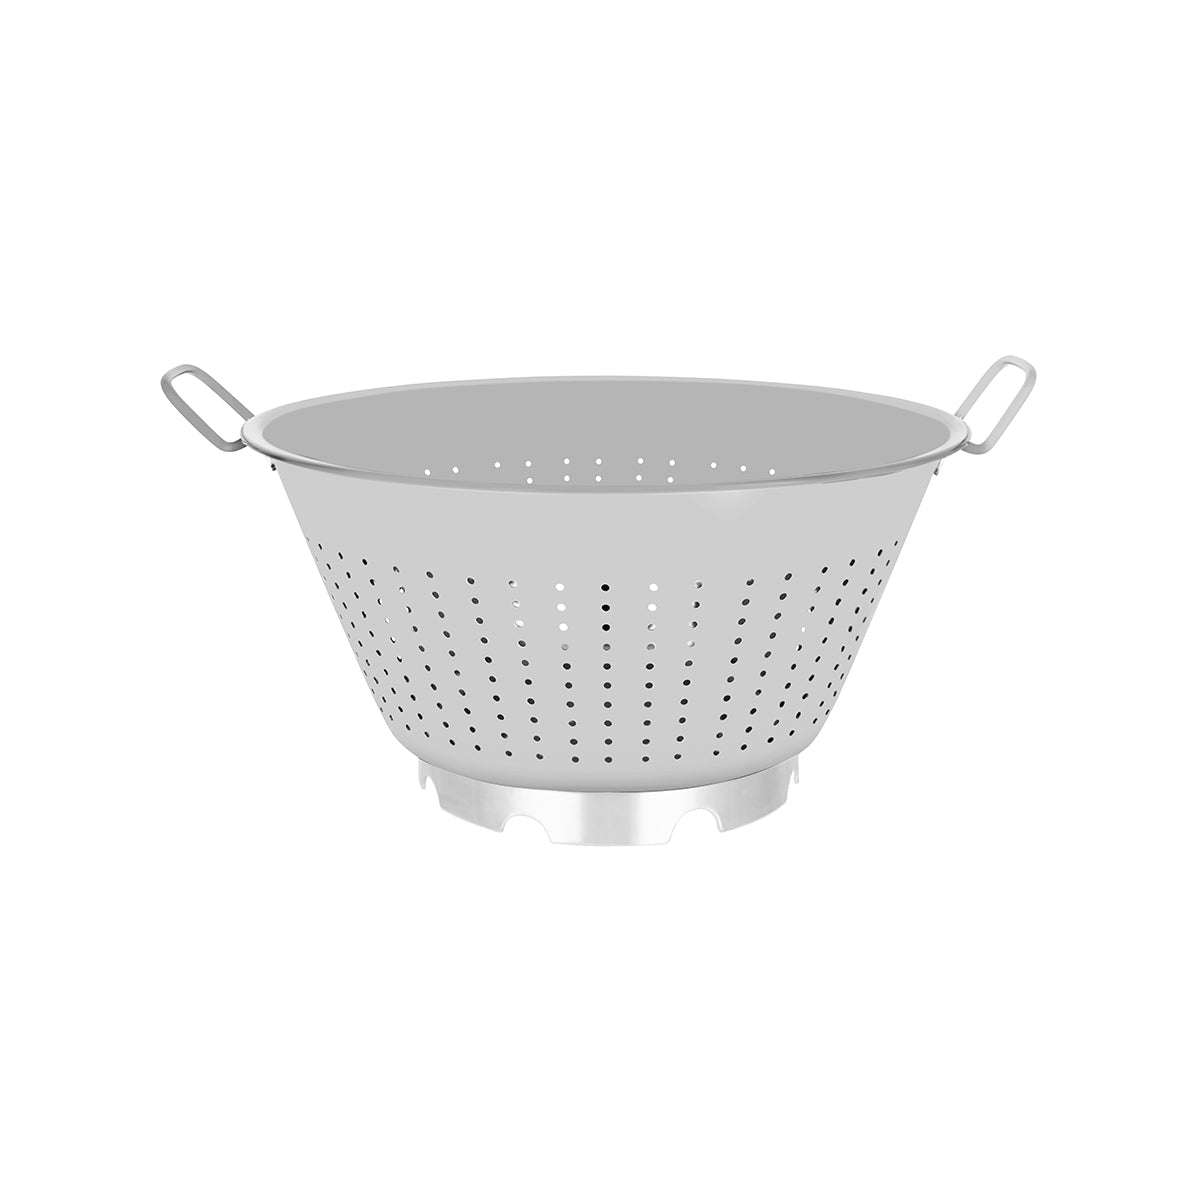 70224 Chef Inox Colander Footed Stainless Steel 400mm Tomkin Australia Hospitality Supplies